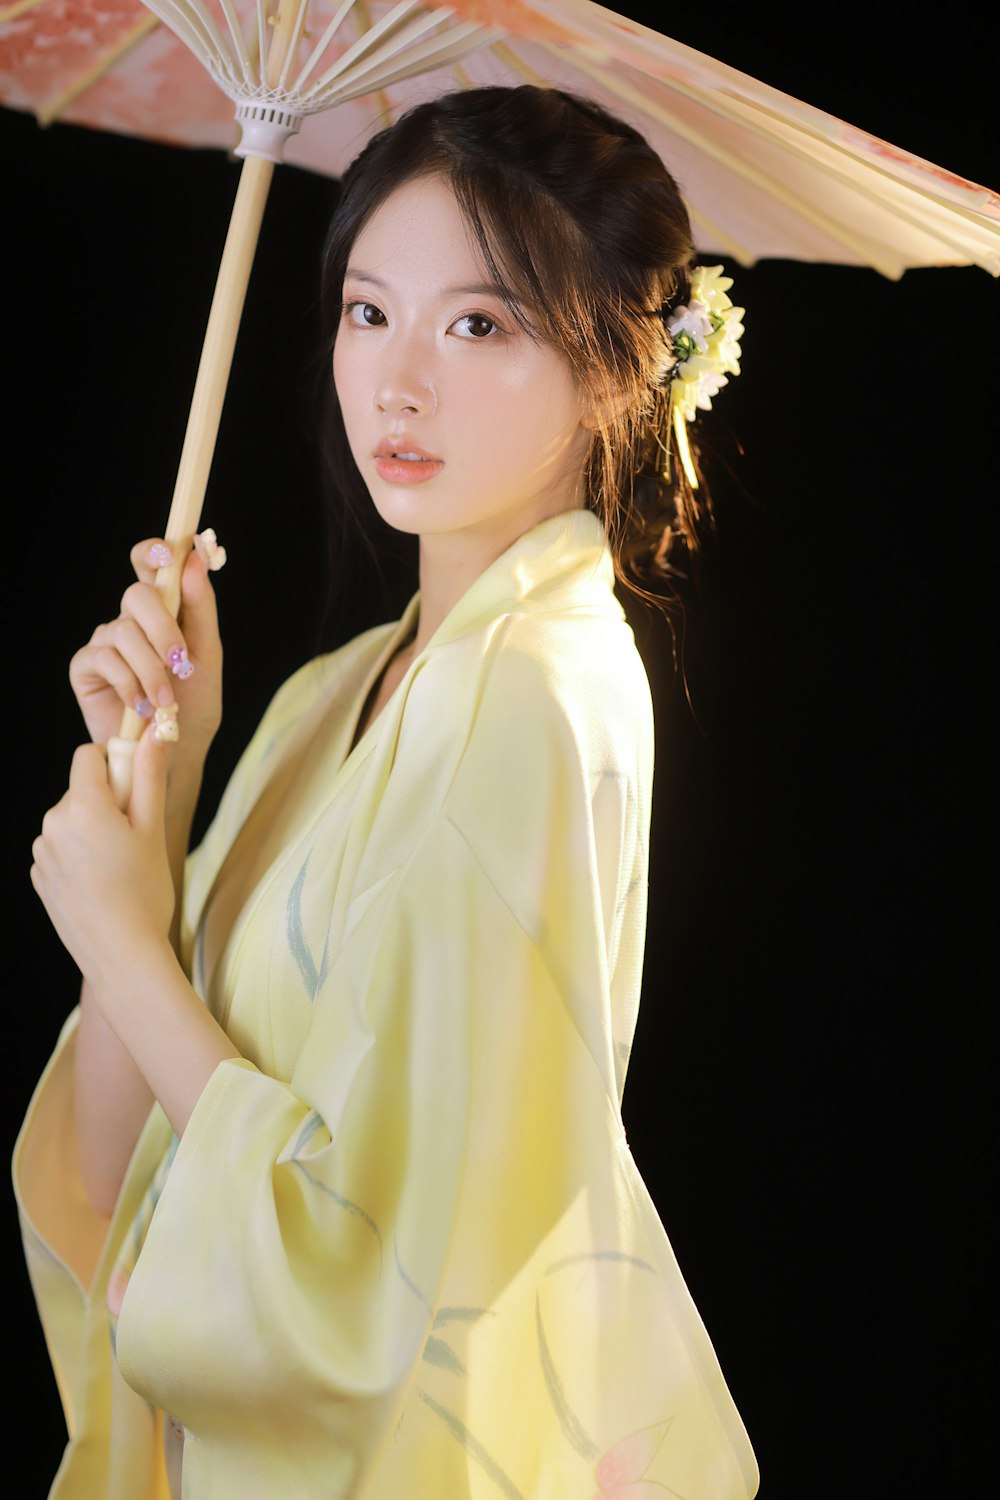 woman in yellow robe holding brown wooden stick